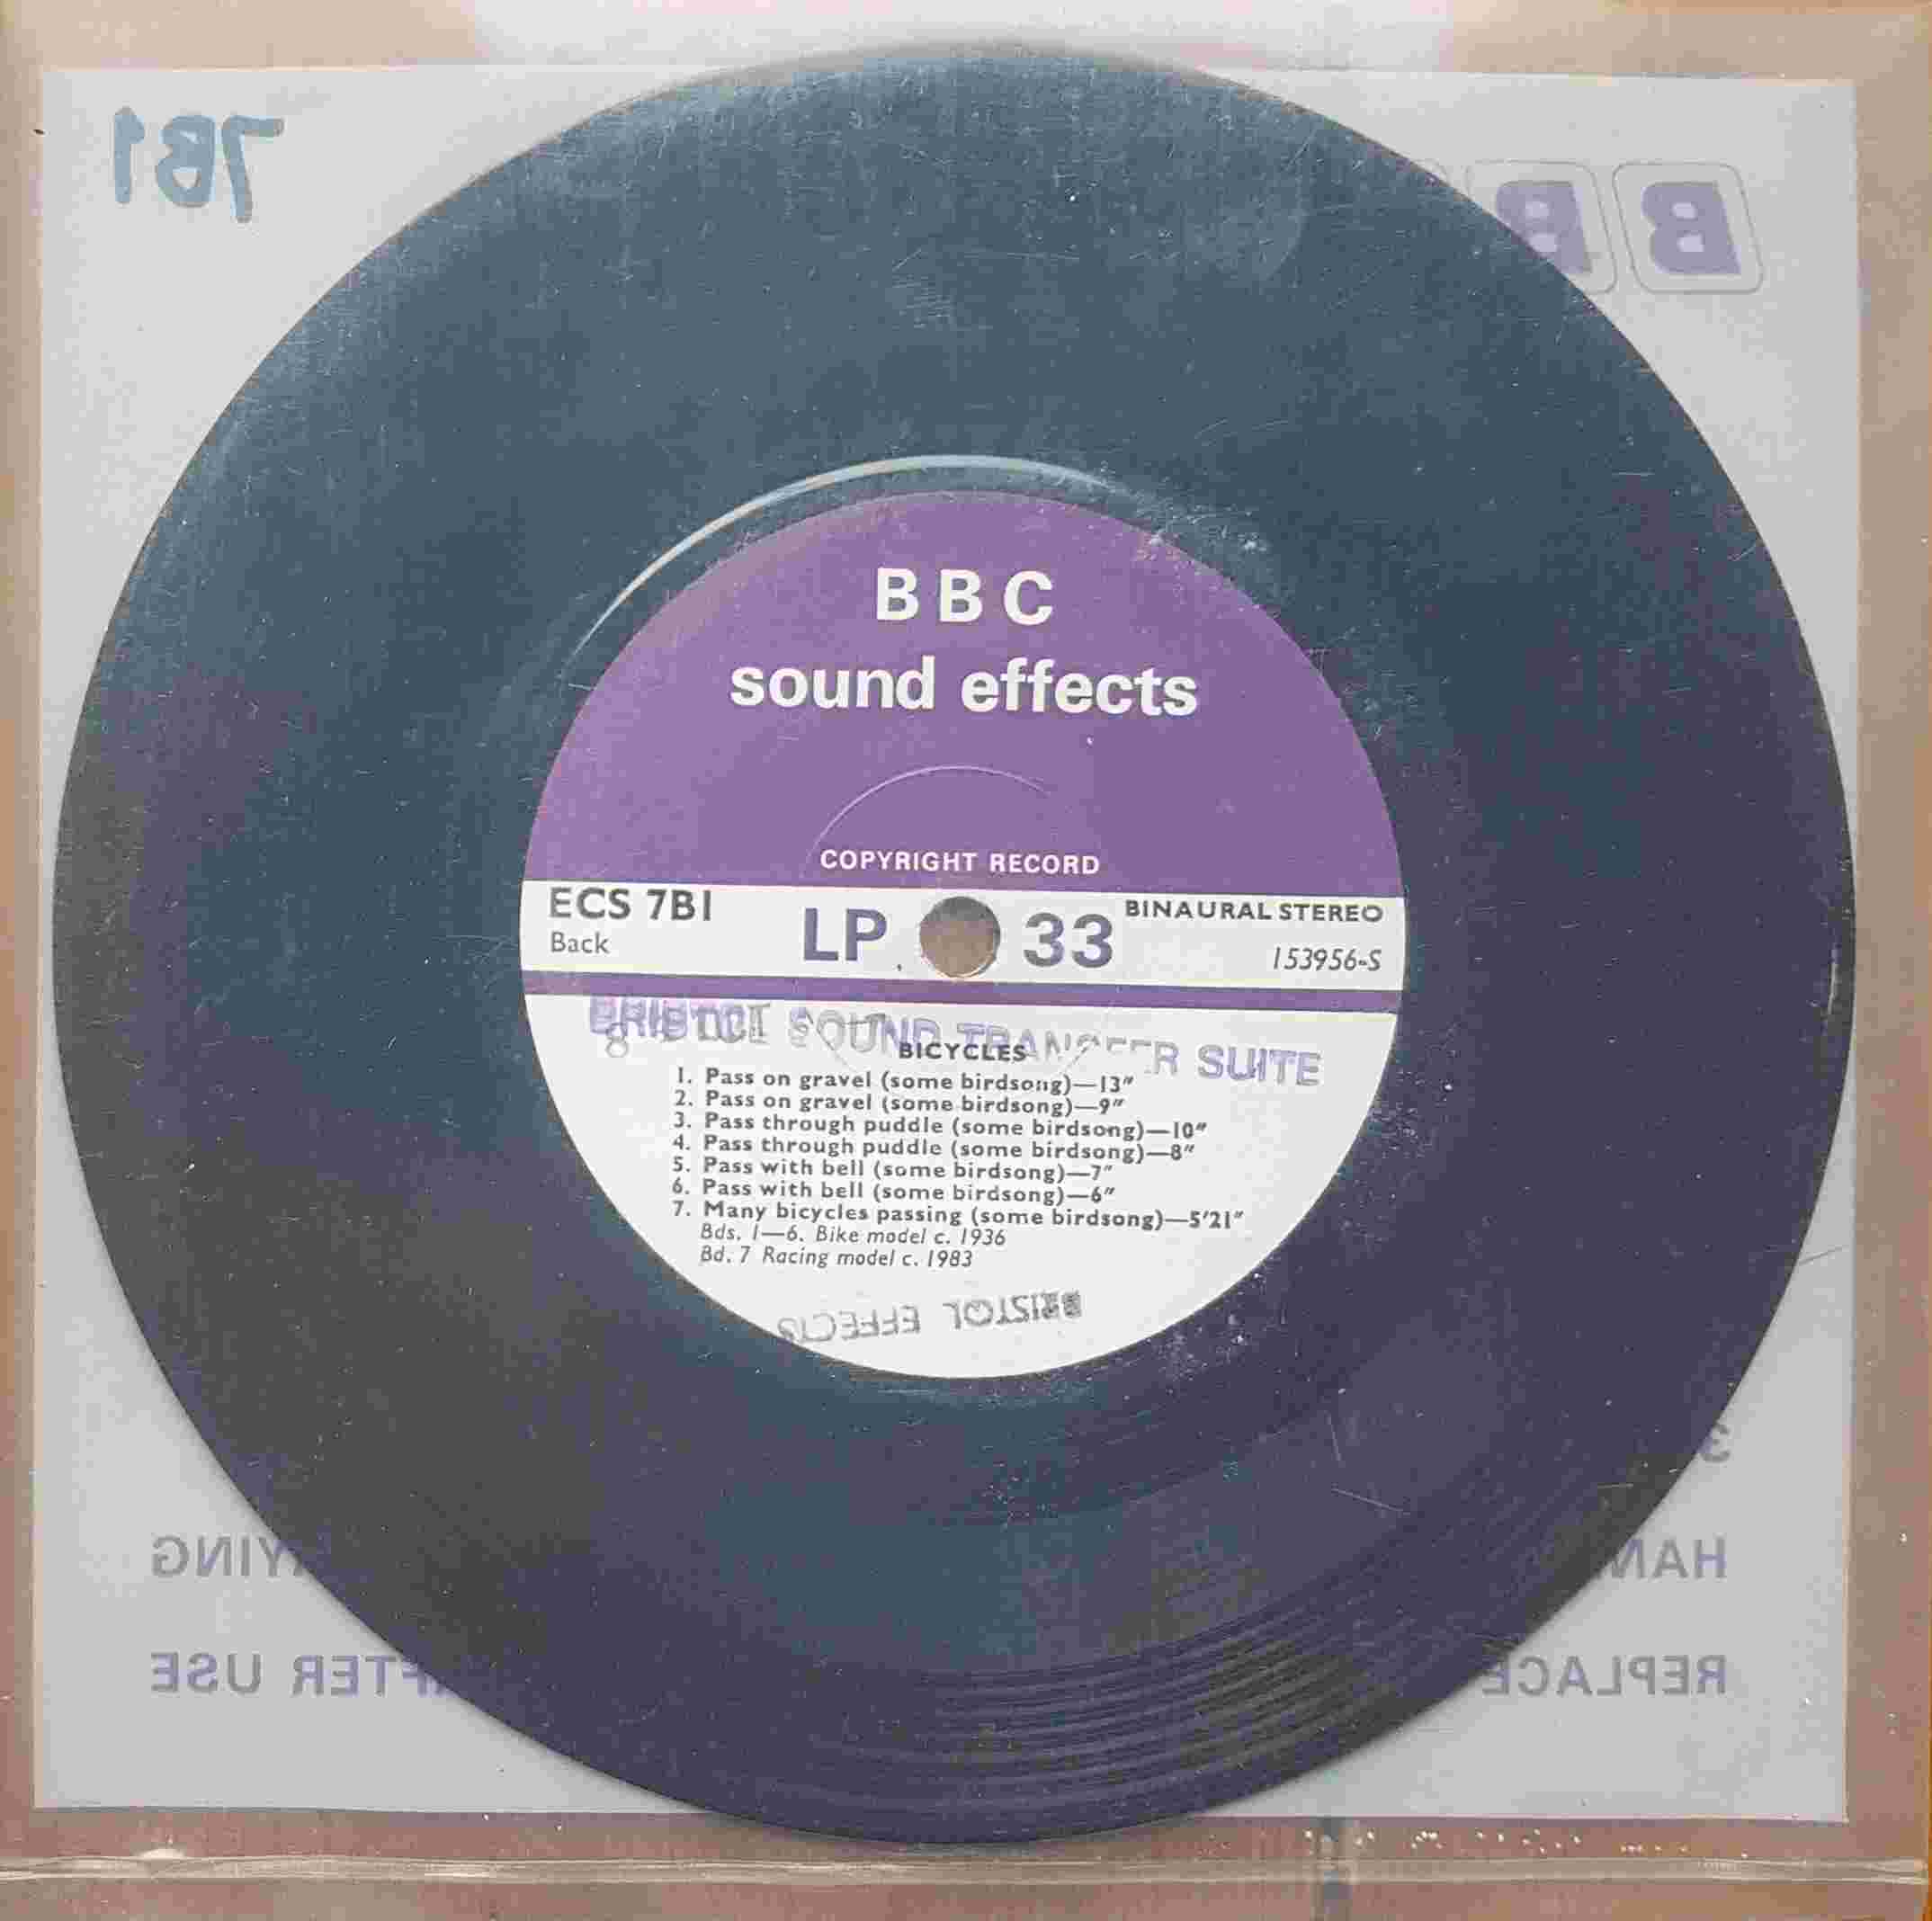 Picture of ECS 7B1 Bicycles by artist Not registered from the BBC records and Tapes library